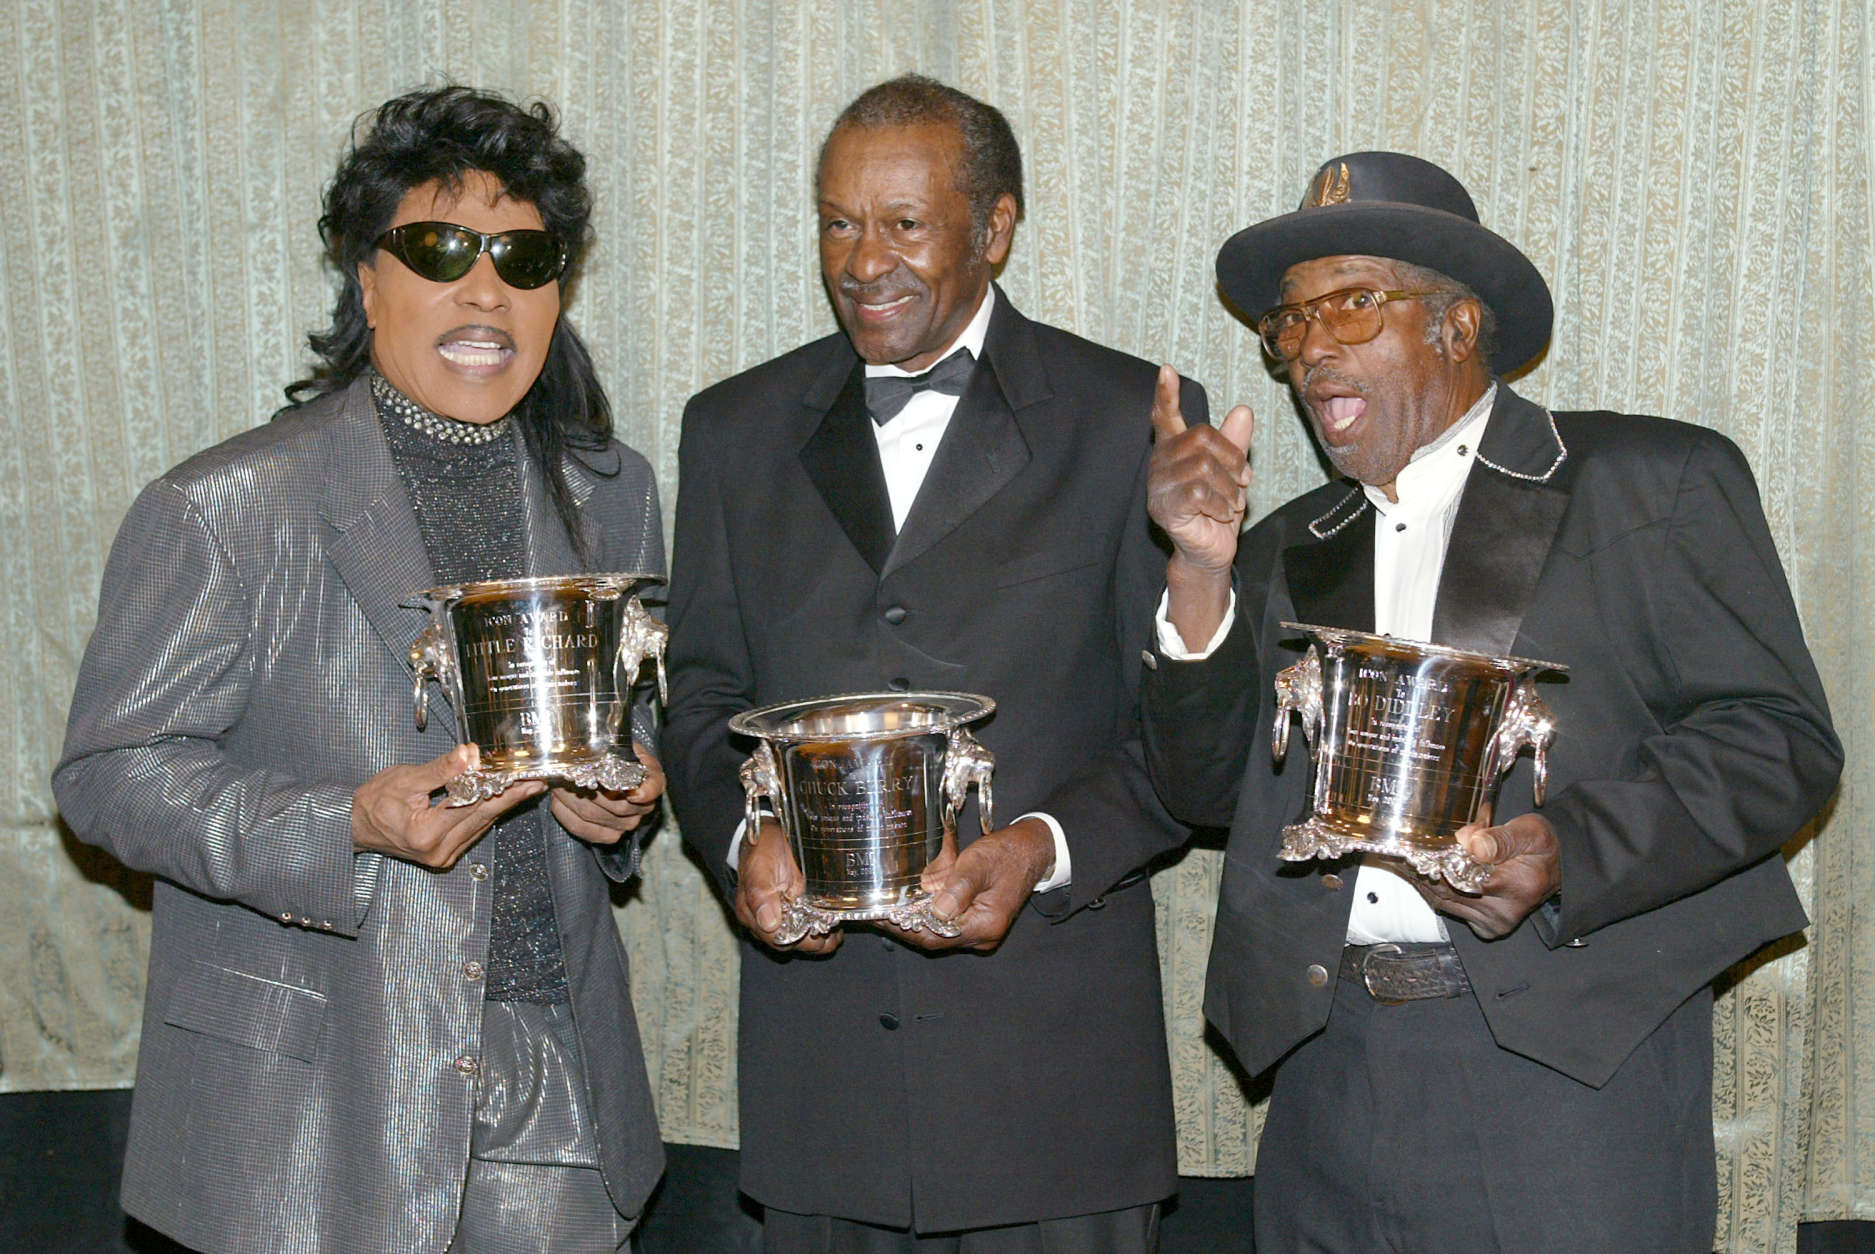 Little Richard, Chuck Berry and Bo Diddley were each honored with the "Icon Award" at "The 50th Annual BMI Pop Awards" at the Regent Beverly Wilshire Hotel in Beverly Hills, Ca. Tuesday, May 14, 2002. Photo by Kevin Winter/Getty Images.